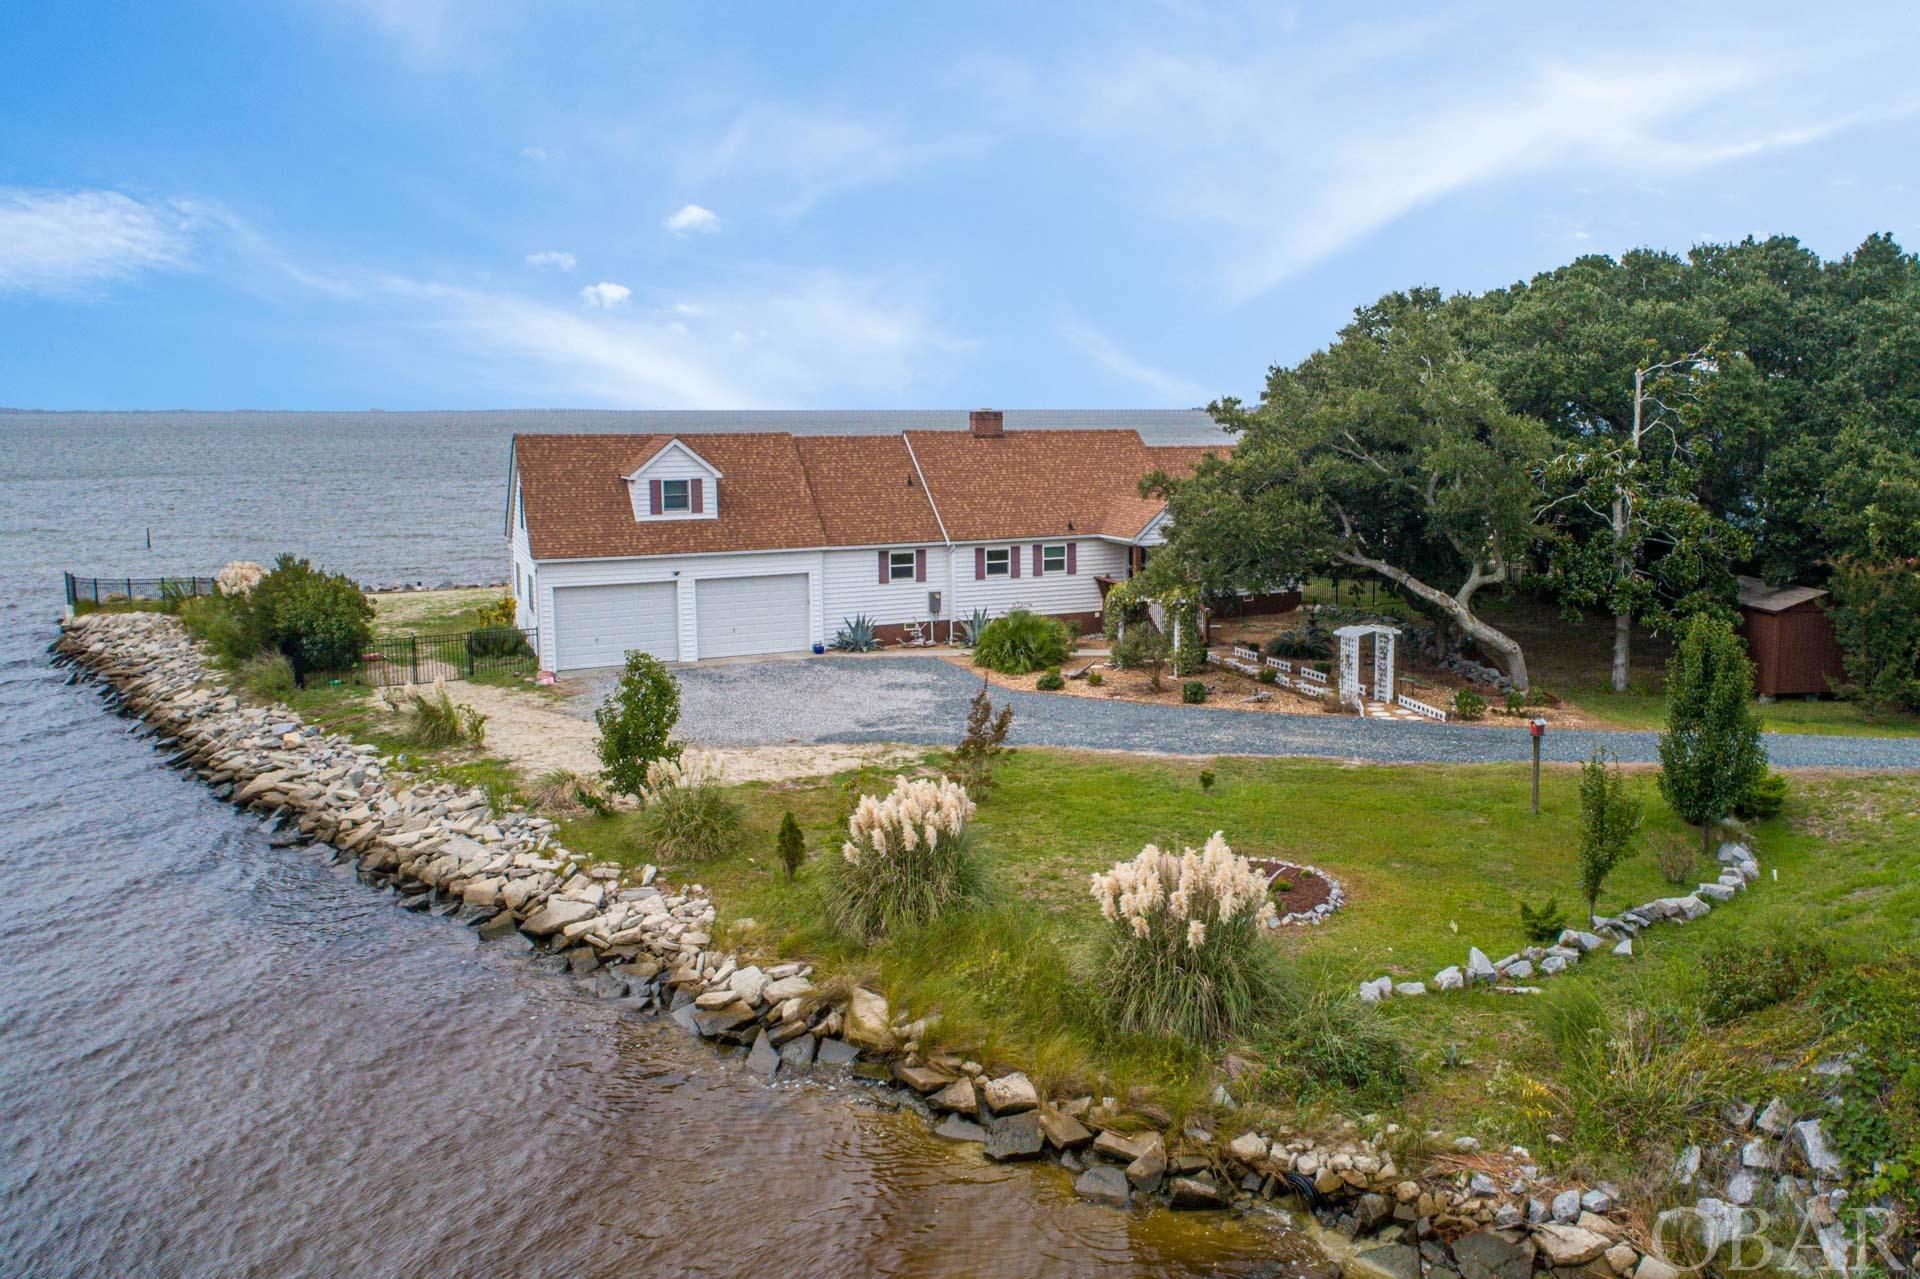 Enjoy serene and sparkling vistas of the Croatan Sound from nearly every room of this exquisite soundfront getaway.  With over 400 feet of unparalleled water frontage, fortified with bulkhead and rip-rap, this residence is a waterfront haven.  Spread across two levels with 5 bedrooms and 4 bathrooms, providing ample space for relaxation and comfort.  Thoughtful and quality features include a custom kitchen with solid wood cabinetry, stainless appliances, a gas cooktop, and separate coffee bar, a large sunroom with UV blocking windows, a 5-person hot tub that overlooks the sound, a first level master with a private deck, and a two-car garage with a back side garage door for yard maintenance.  The upstairs master suite includes a private deck, soaking tub, and tiled shower.  Upstairs you will also find two additional bedrooms and another full bathroom.  Recent updates include, an updated kitchen including a new 6 burner gas cooktop, new kitchen faucet and double wide sink, new designer pendant lighting, a new tile backsplash, new flooring, and new blinds and shades in the kitchen, new interior paint throughout, brand new bulkhead and rip-rap, a new metal ornamental fence, and newly painted decks. Conveniently located in the picturesque town of Manteo, known for its charm and scenic beauty, and just 7 miles to the oceanfront and Jennette’s Pier.  You will spend your summers swimming in the shallow sandy bottom sound, and your winters cozied up by the gas burning fireplace in the heart of the home.  Add this home to your list and see it for yourself!